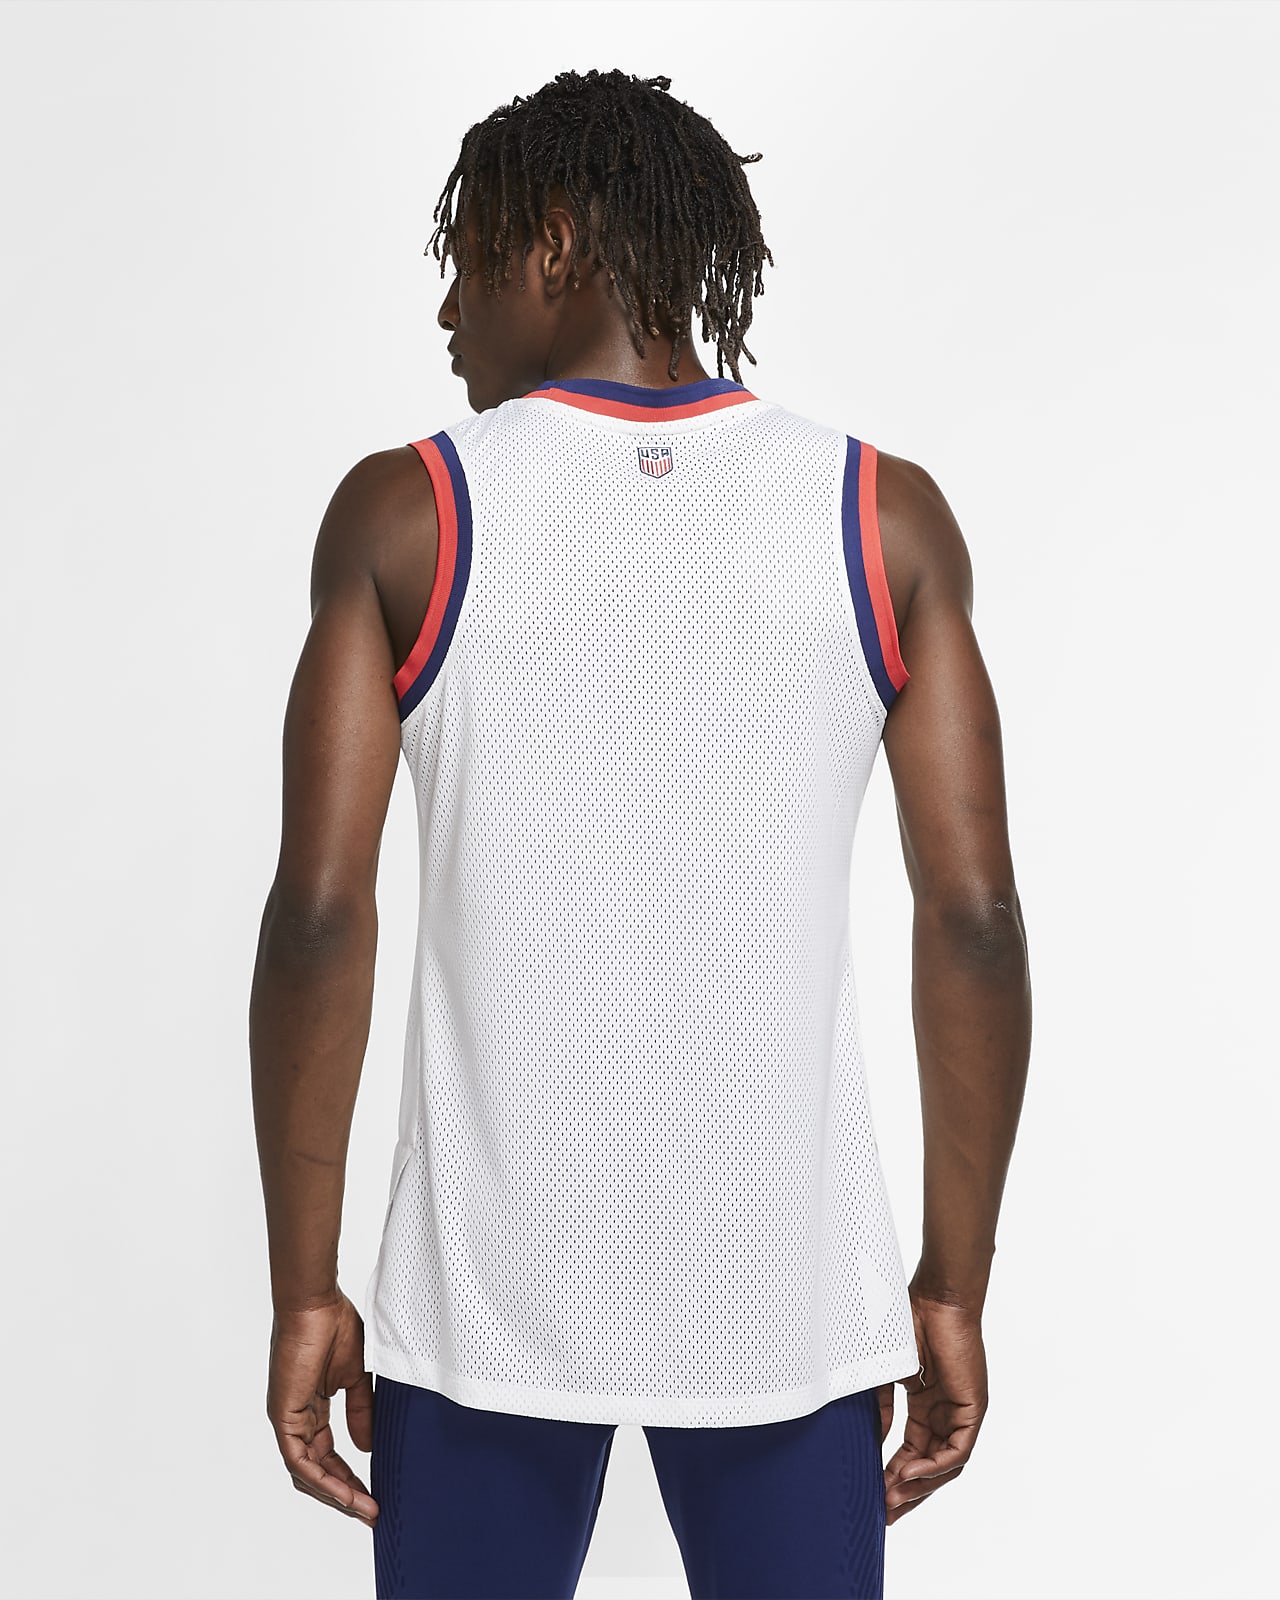 Nike Basketball Shirts & Tops Clothing for Men for sale